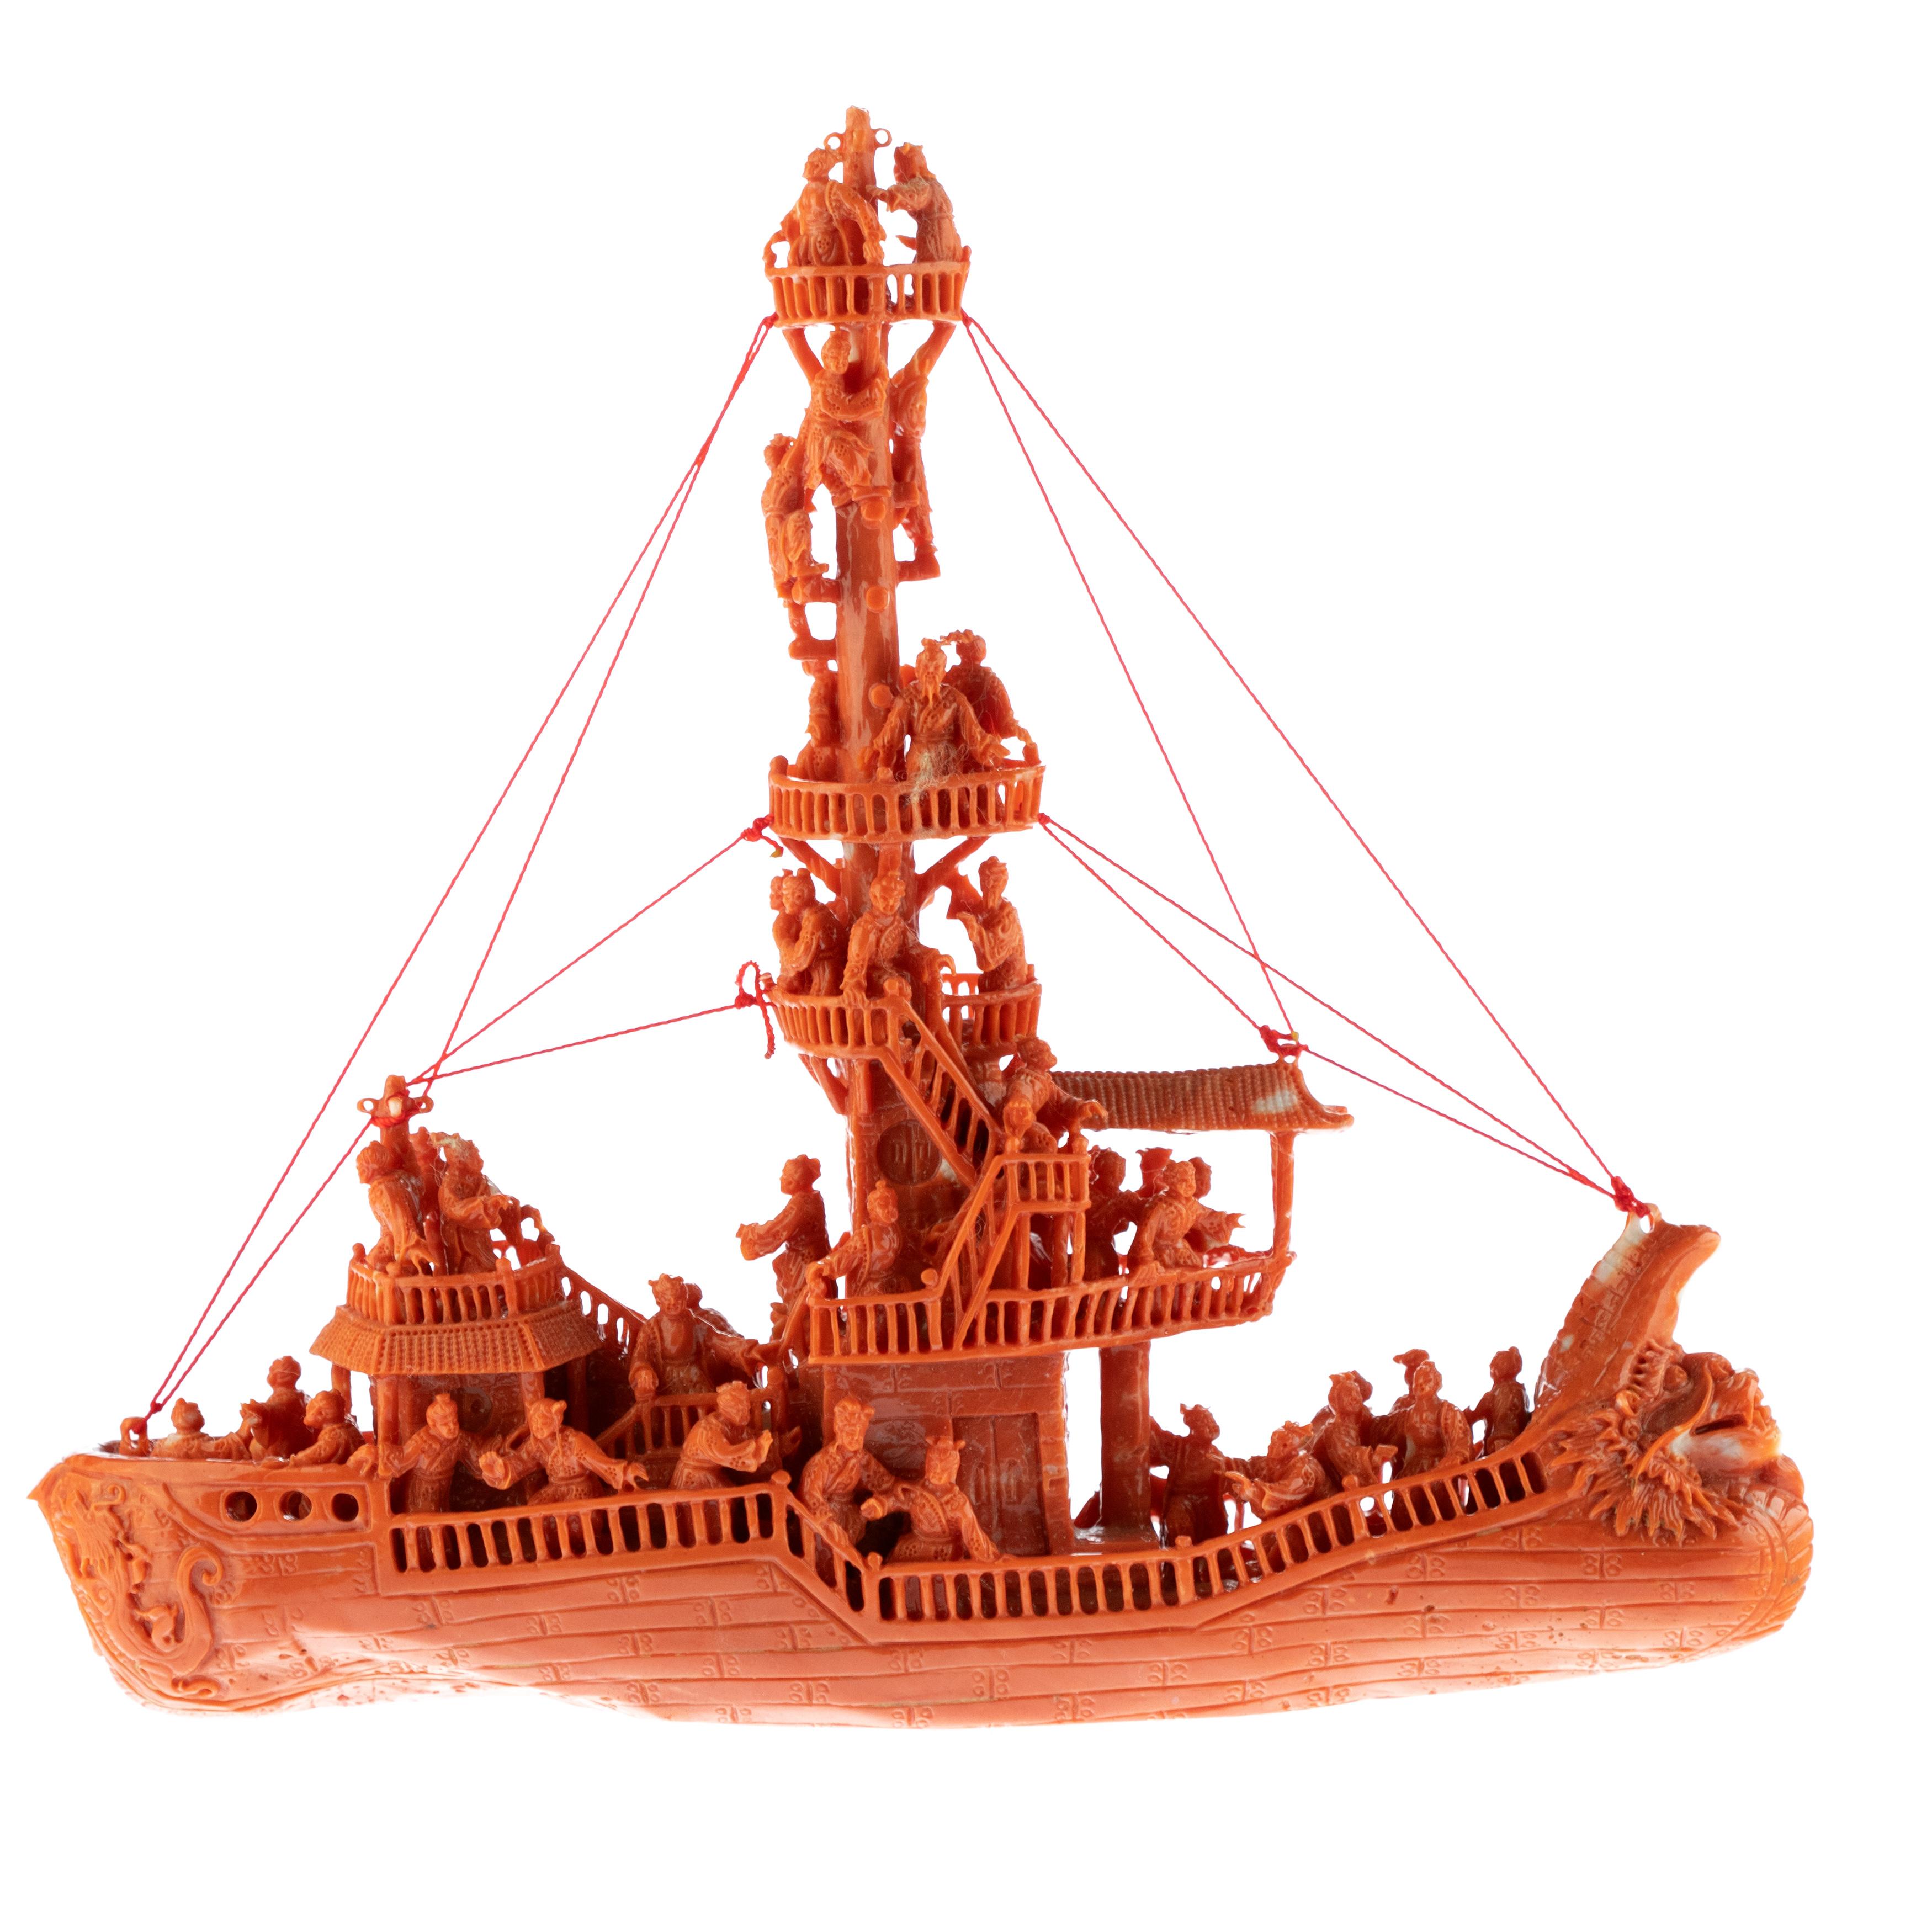 Exotic natural coral sculpture, inspired in the reality and beauty of the ocean. Red Mediterranean coral branches come to live in a unique and natural ship with 100 crew. Incredible sculpture that evokes the detail and dedication of coral work in